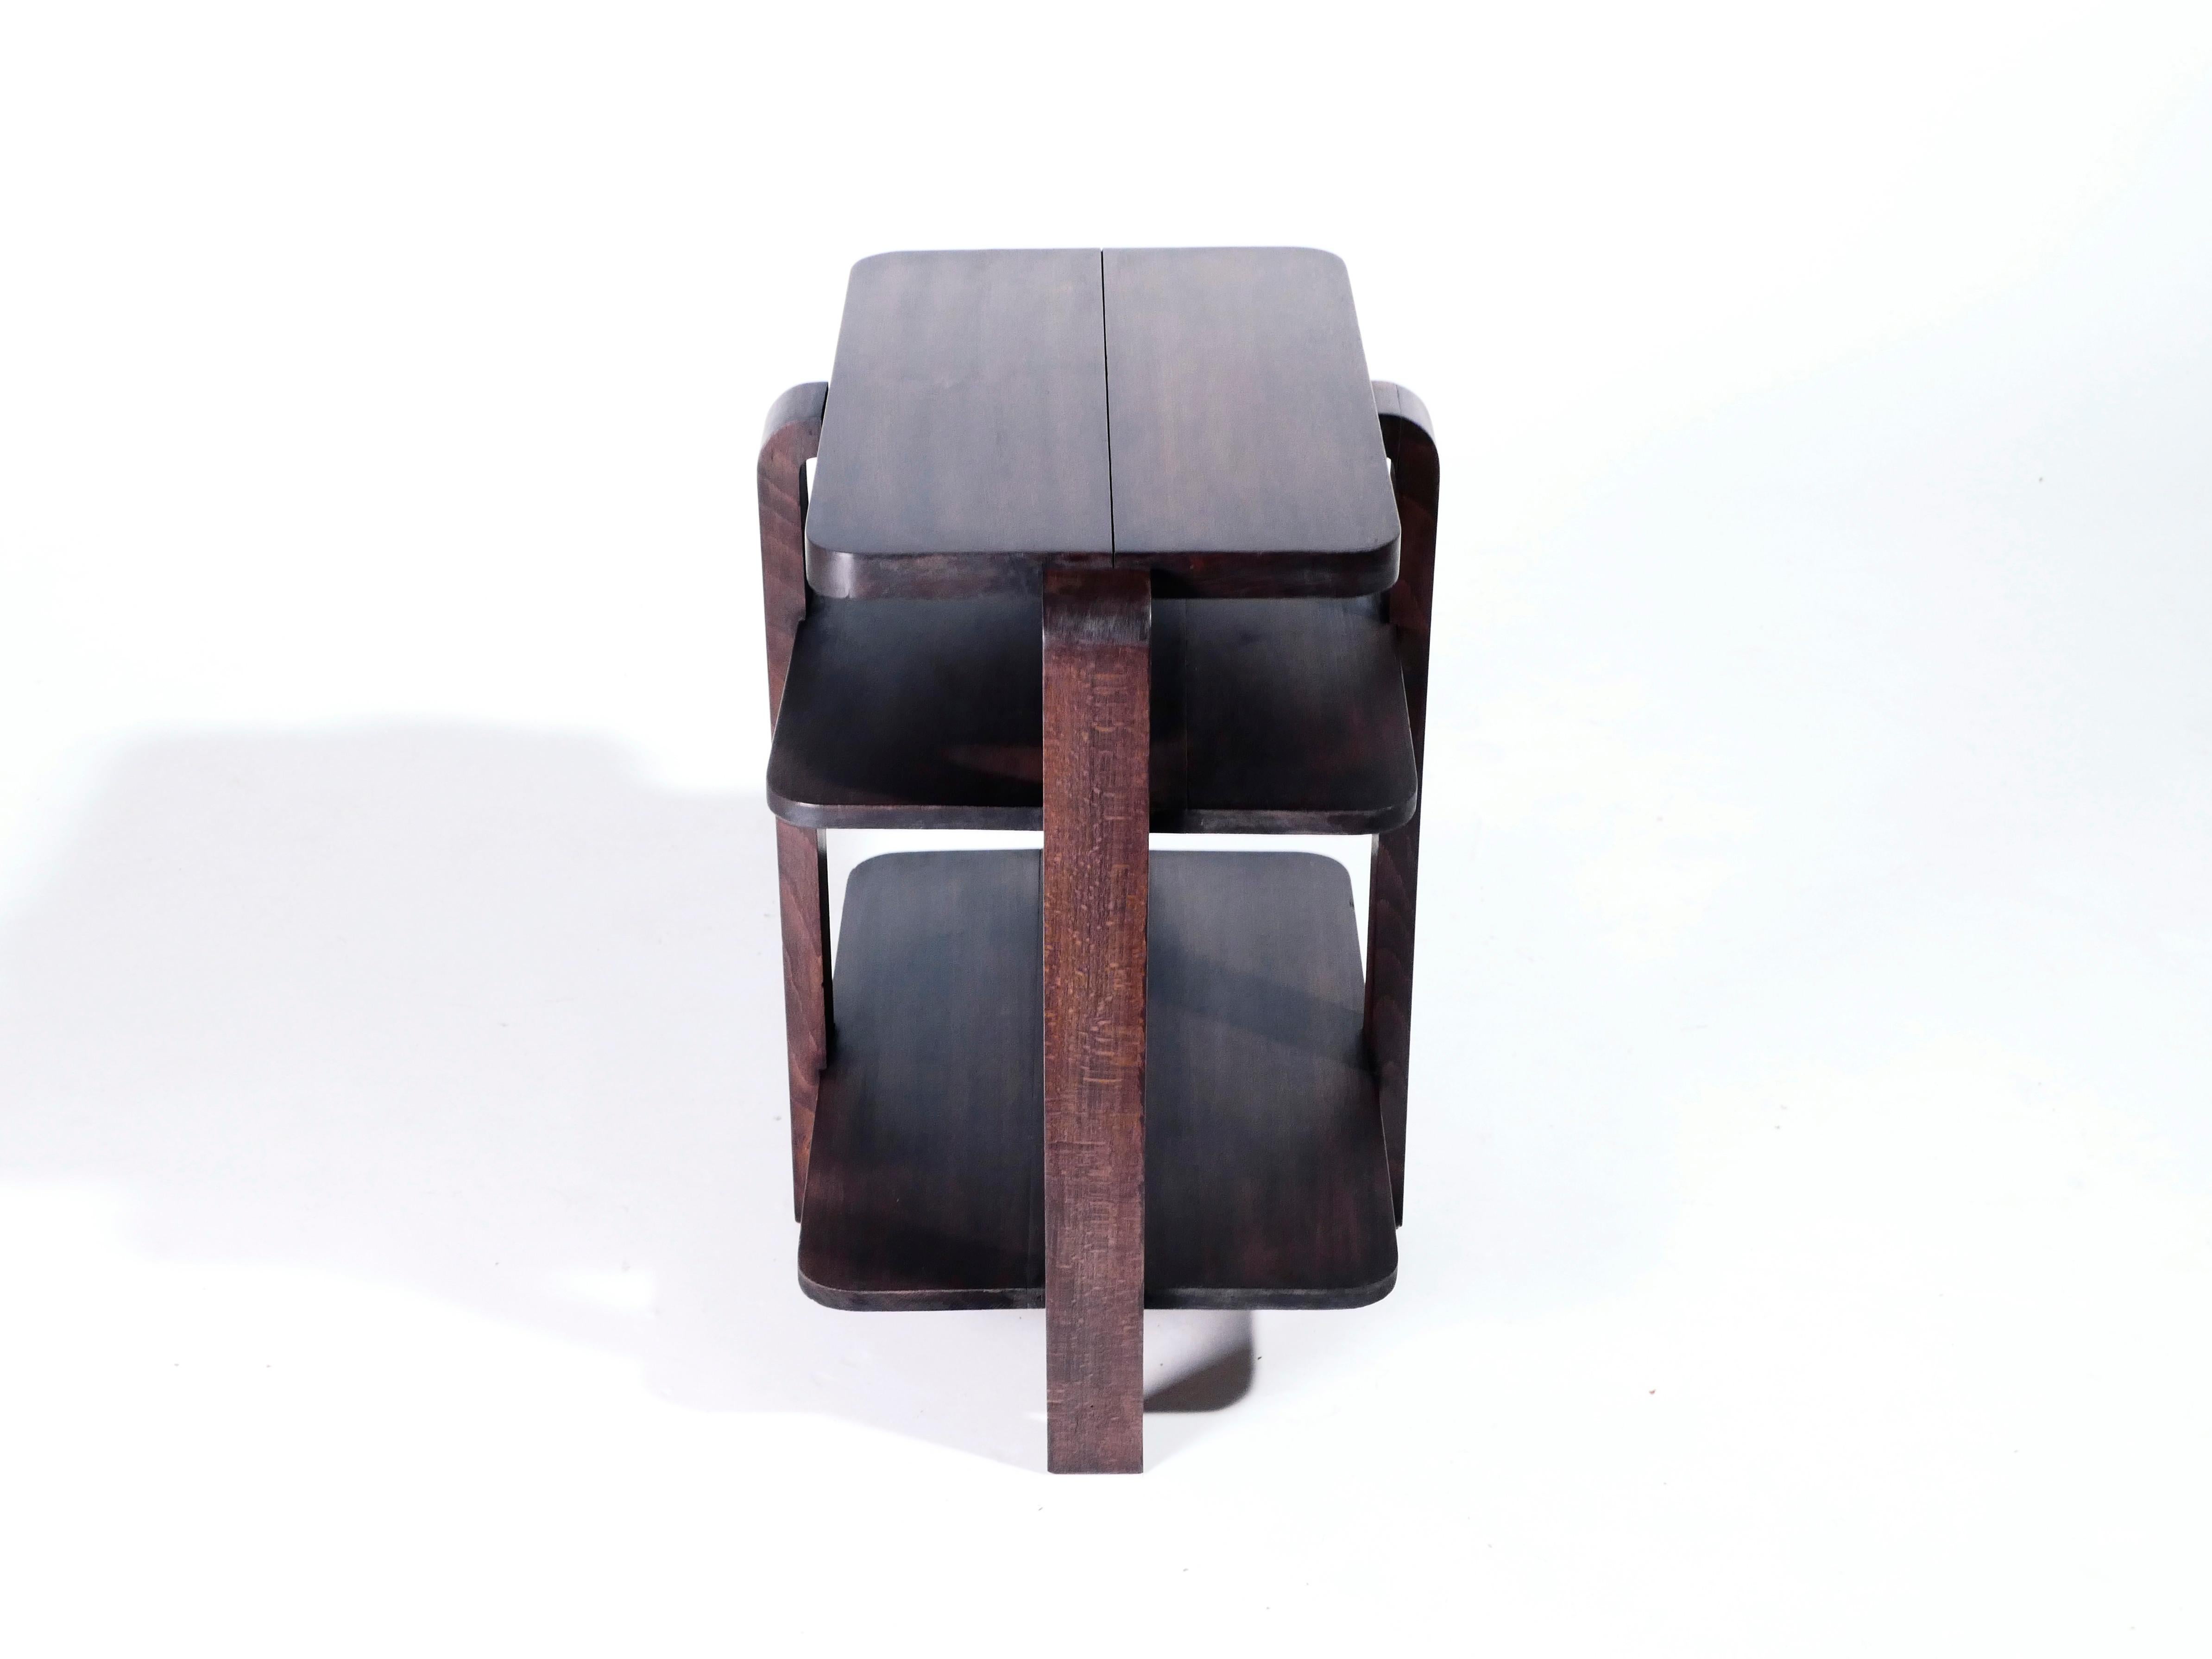 French Art Deco Modernist Mahogany Side Table, 1940s 2